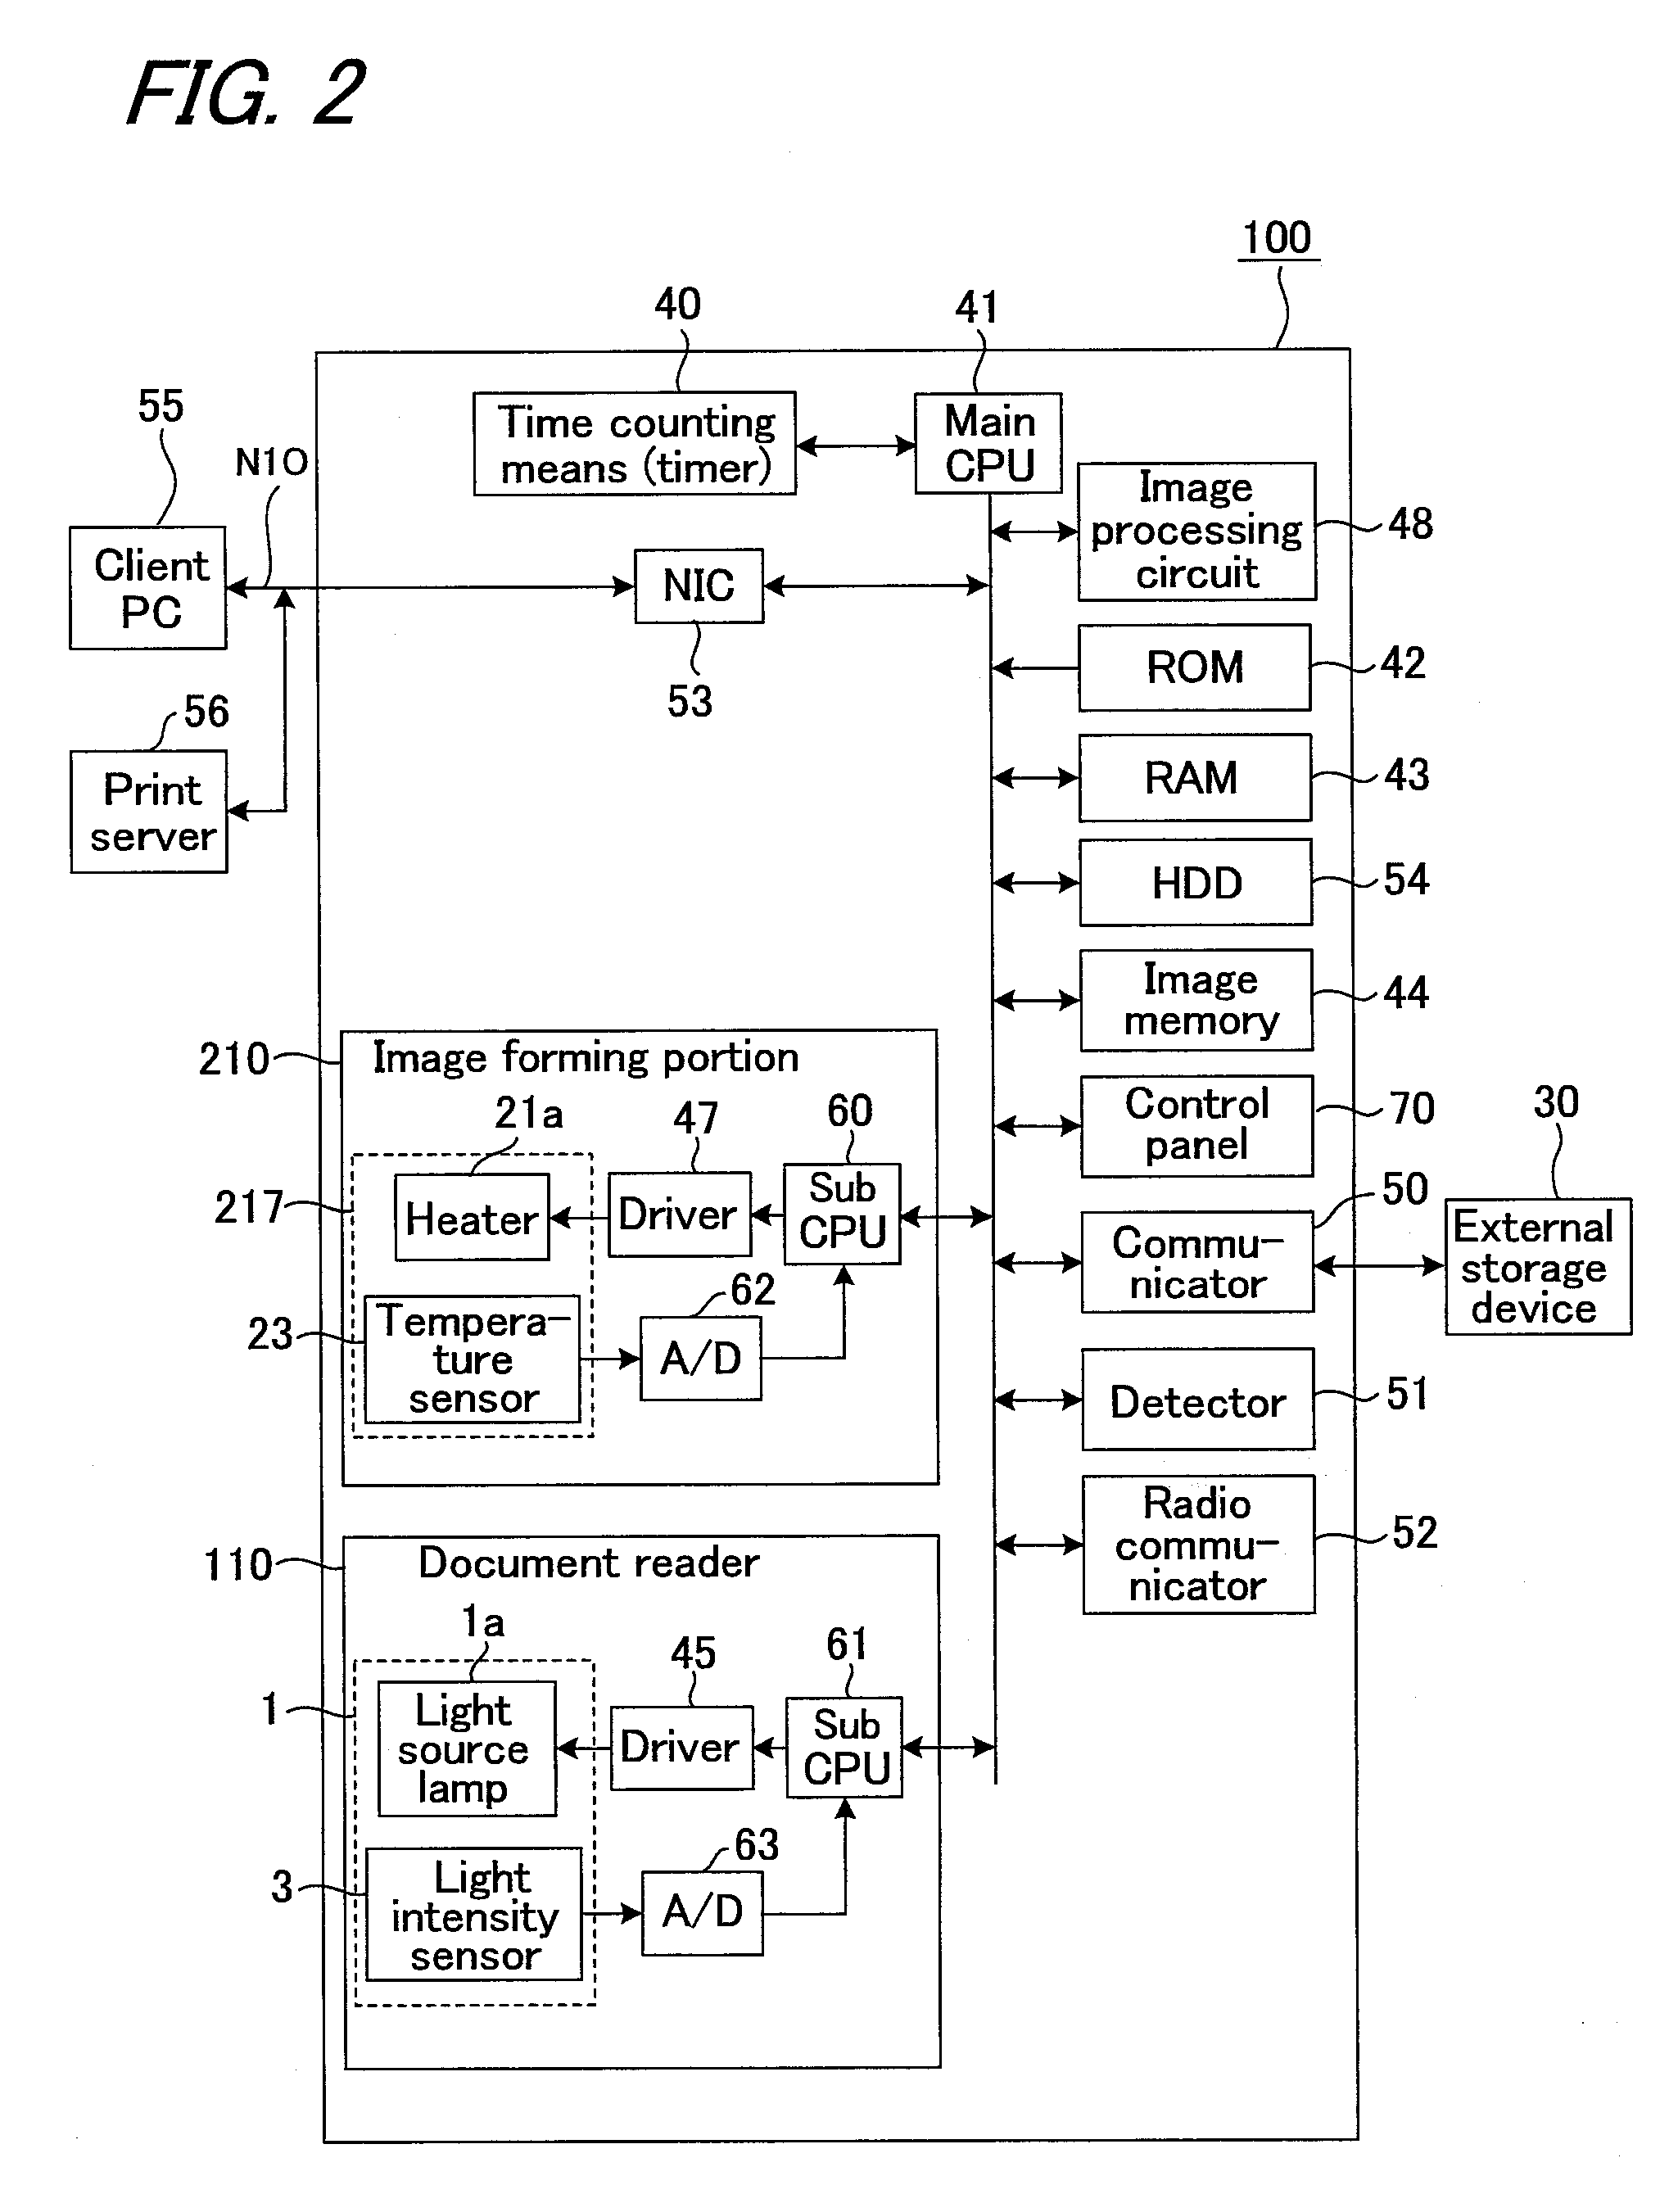 Image processing apparatus, image processing system and image processing program